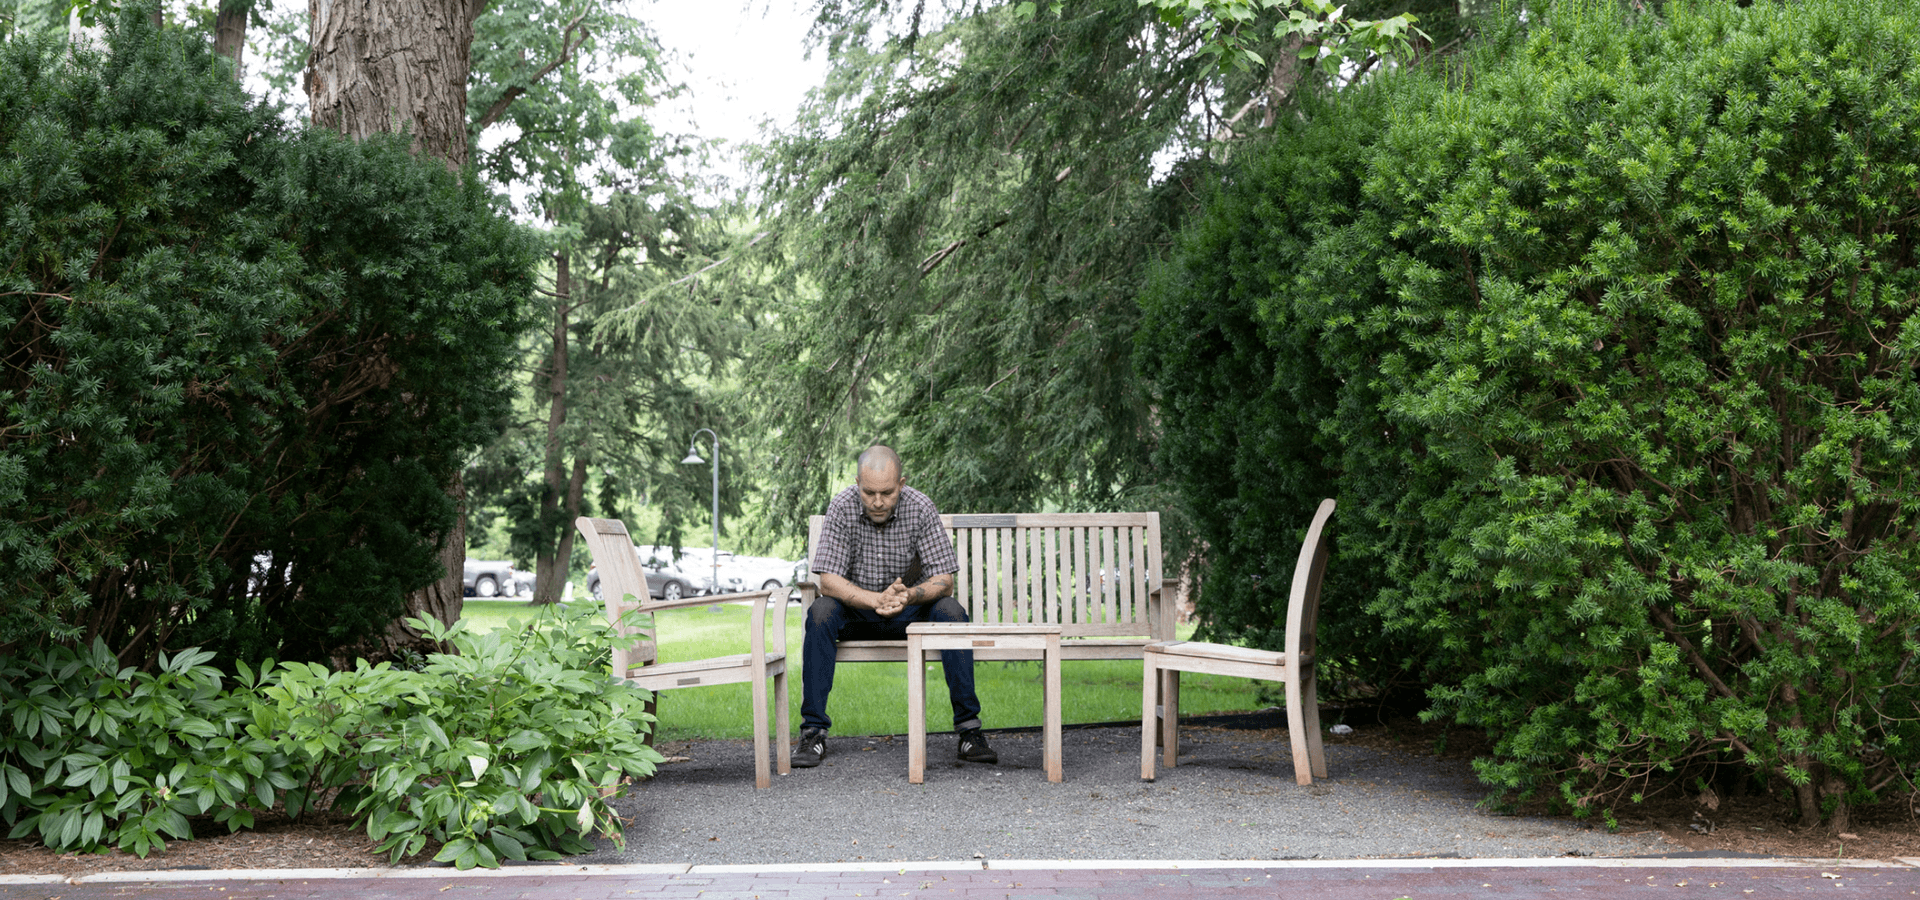 Man sitting on park bench contemplating treatment